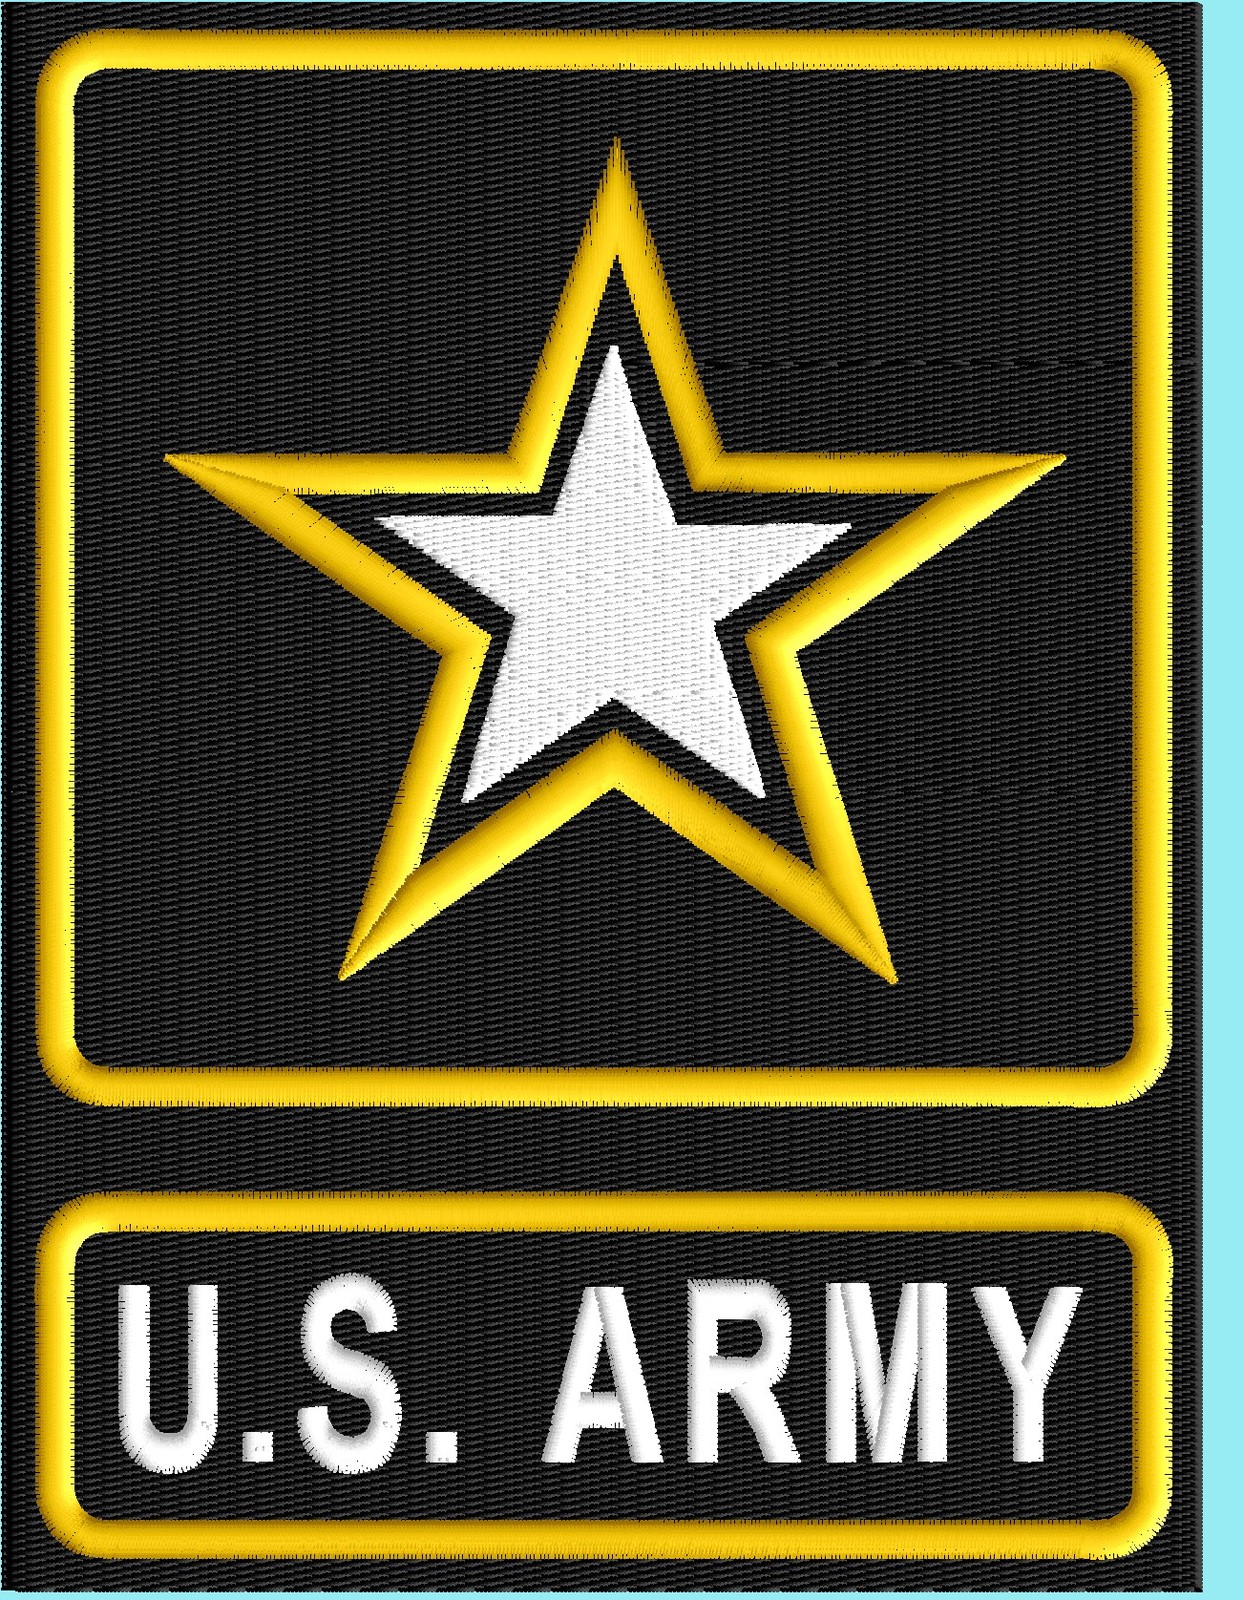 US Army crest logo 3 size pack machine and 50 similar items